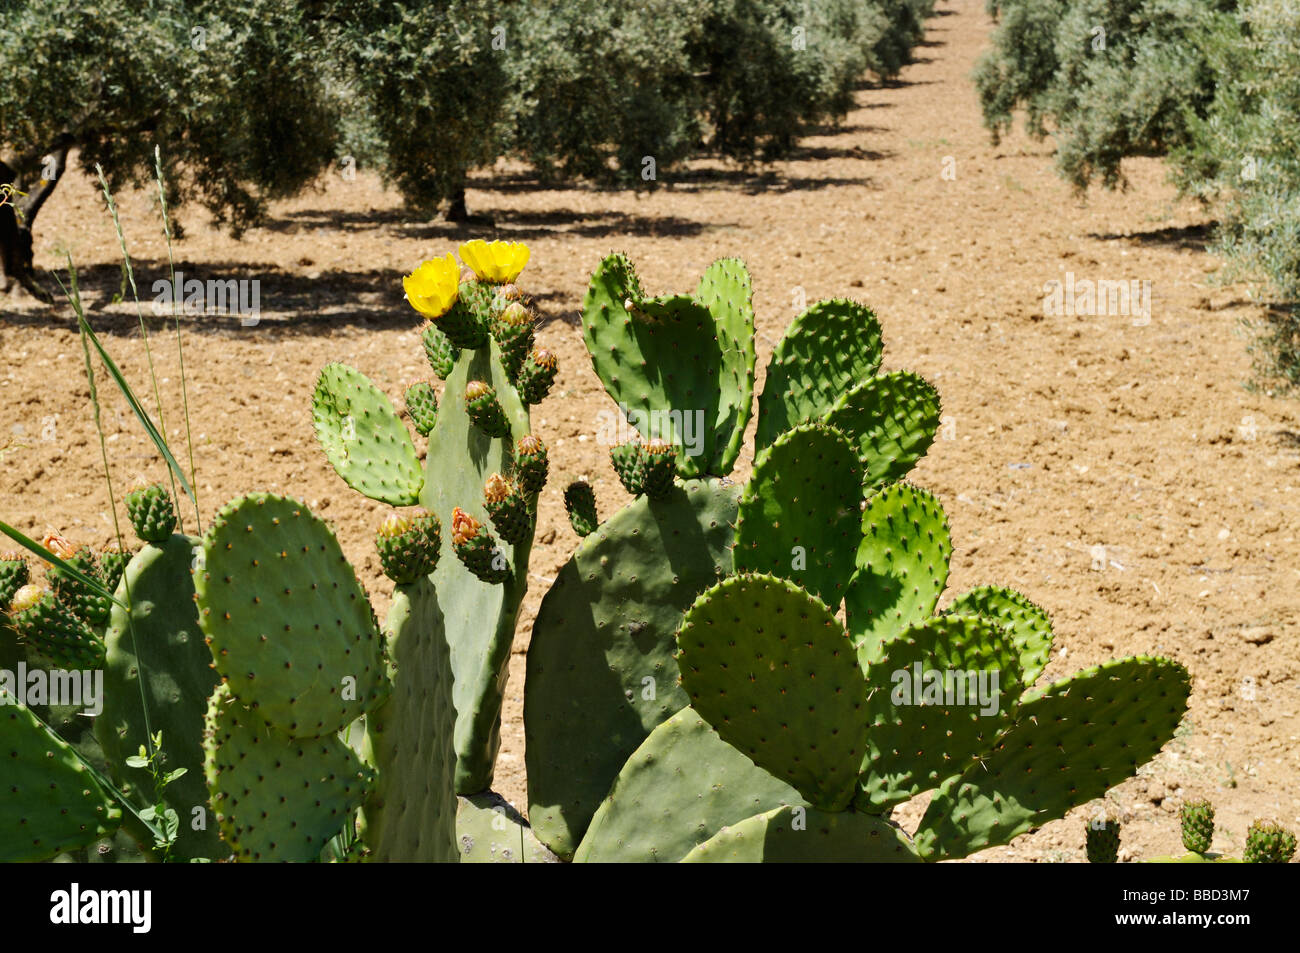 Flowering Prickly pear cactus Opuntia humifusa growing at edge of olive orchard Spain Stock Photo